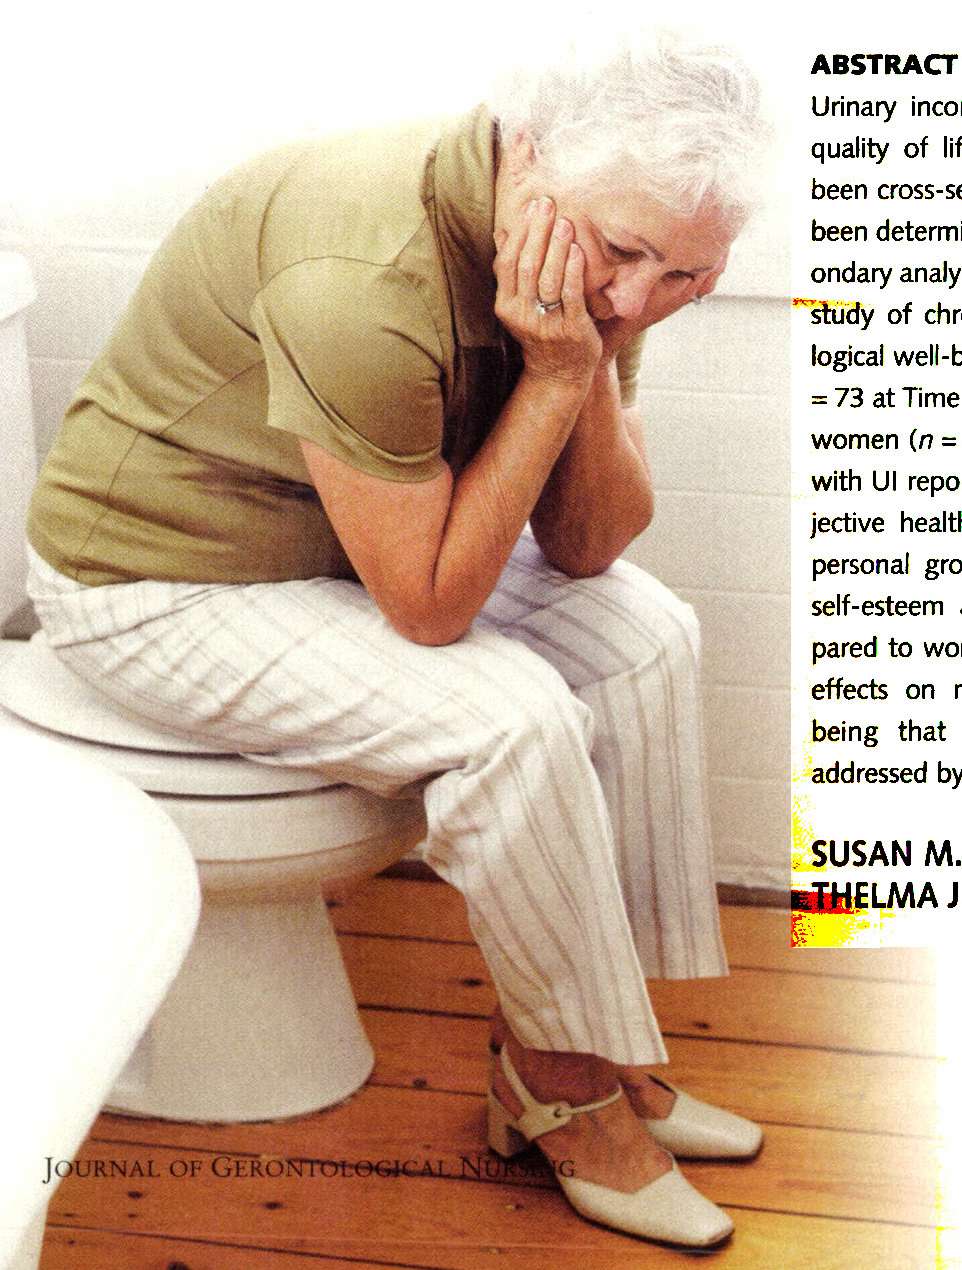 EFFECTS OF Urinary Incontinence: Psychological Well